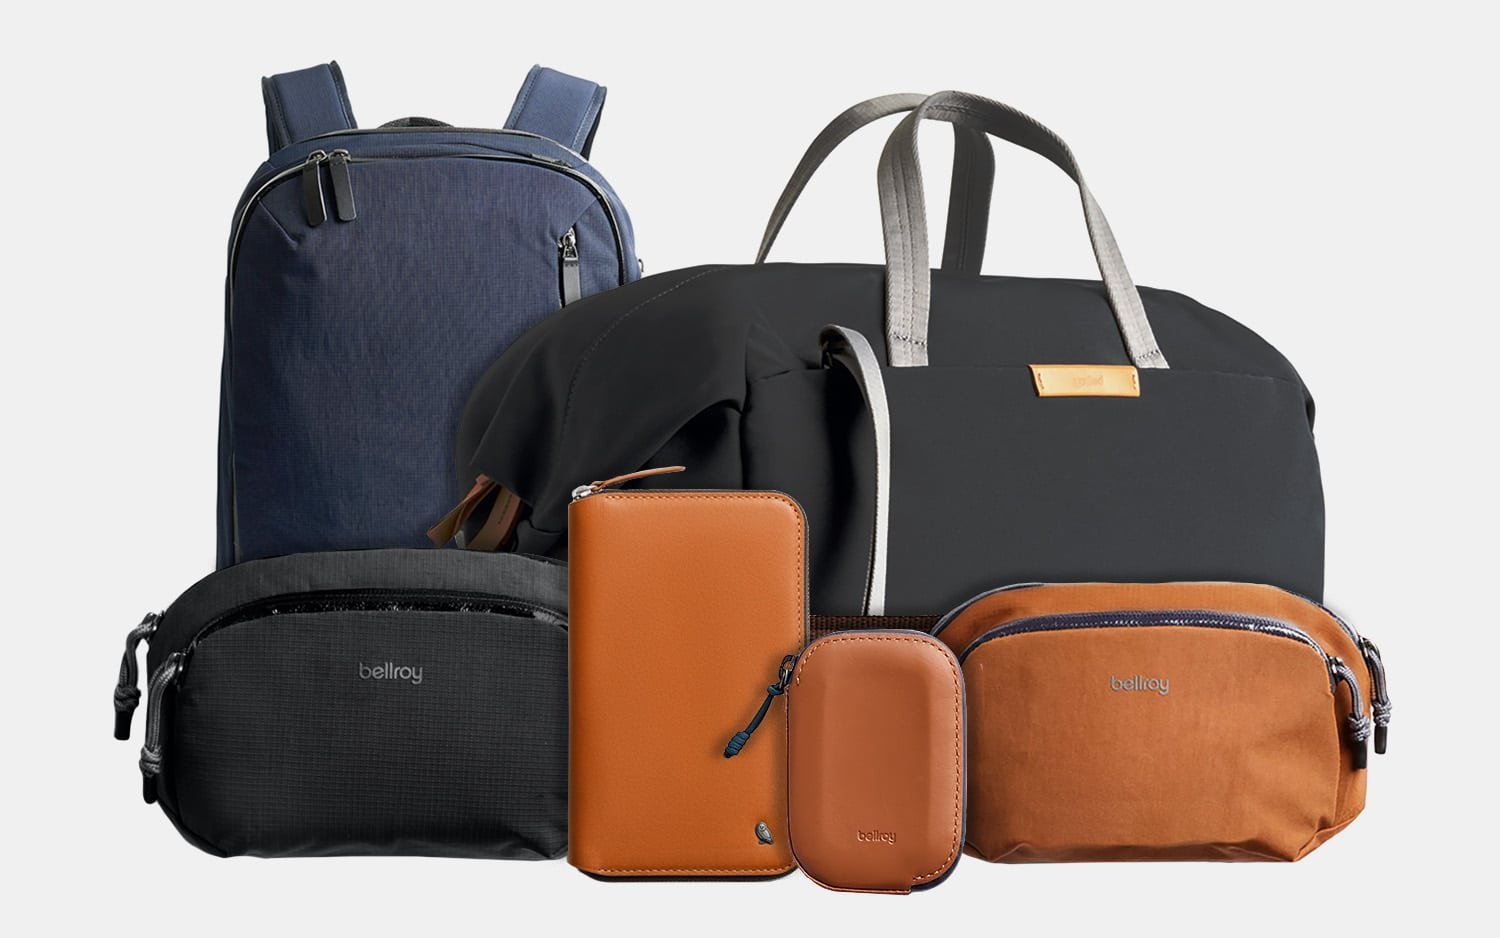 Travel Smarter With These Travel Essentials From Bellroy